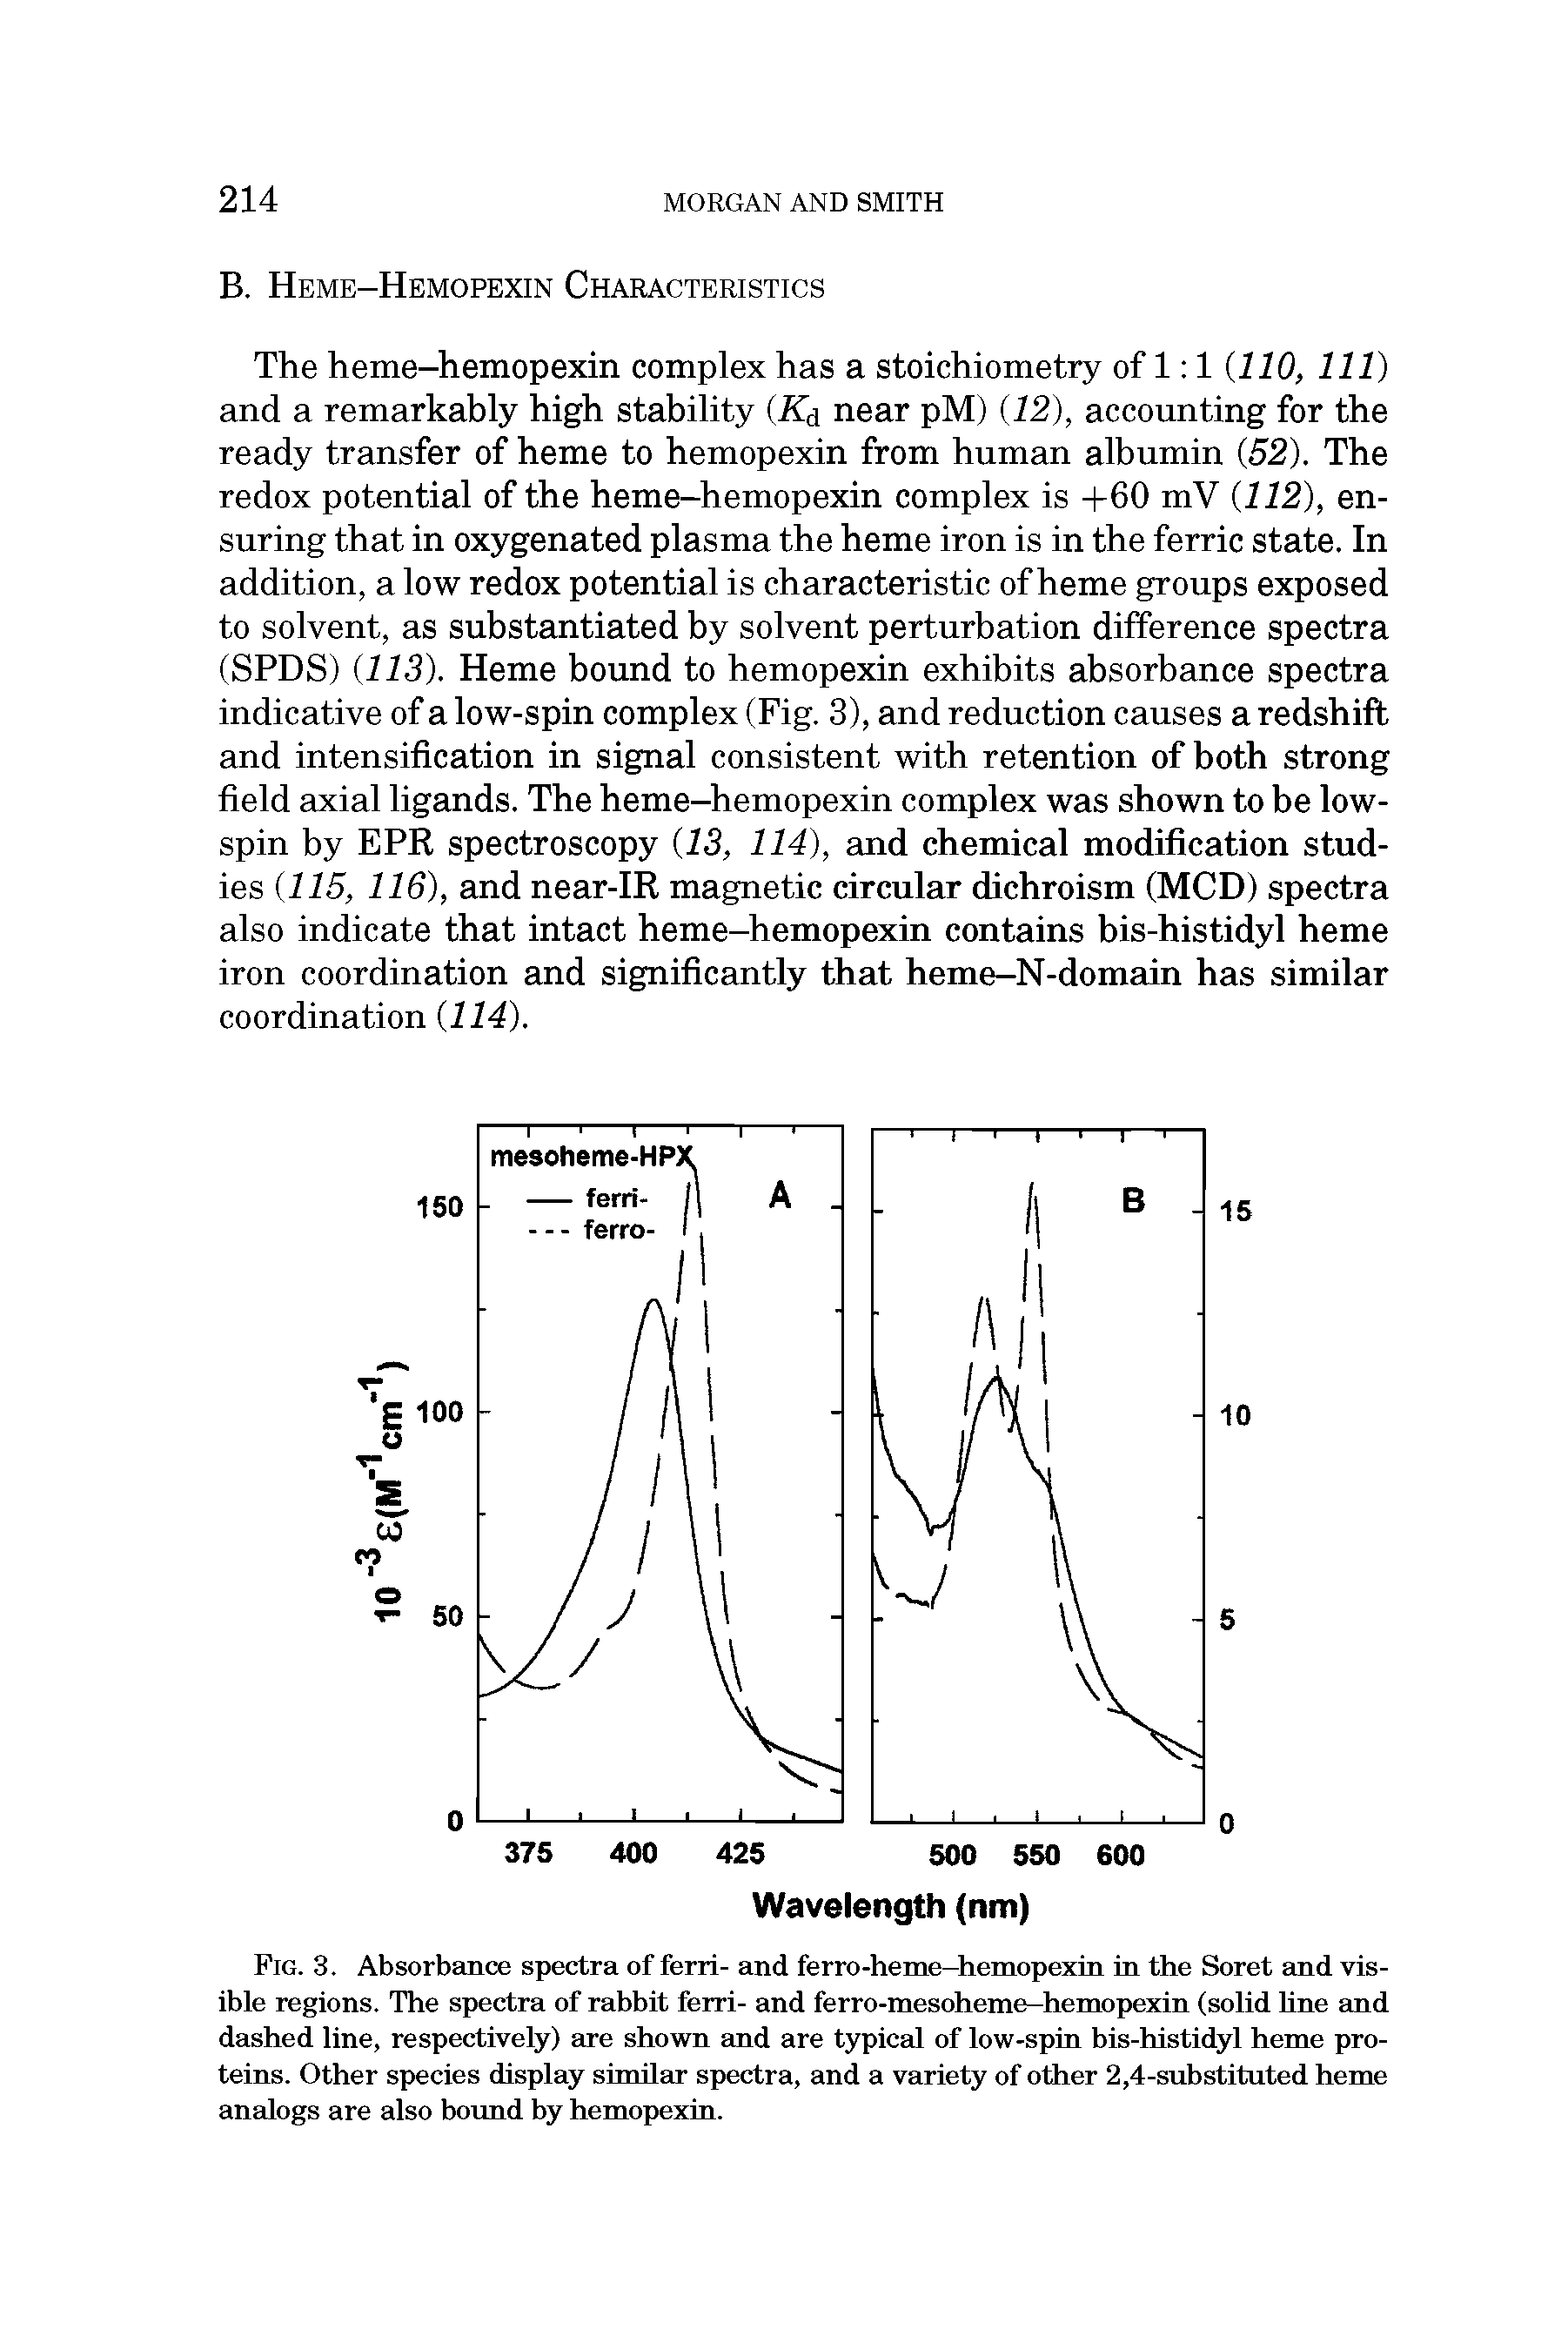 Fig. 3. Absorbance spectra of ferri- and ferro-heme-hemopexin in the Soret and visible regions. The spectra of rabbit ferri- and ferro-mesoheme-hemopexin (solid hne and dashed line, respectively) are shown and are typical of low-spin bis-histidyl heme proteins. Other species display similar spectra, and a variety of other 2,4-substituted heme analogs are also bound by hemopexin.